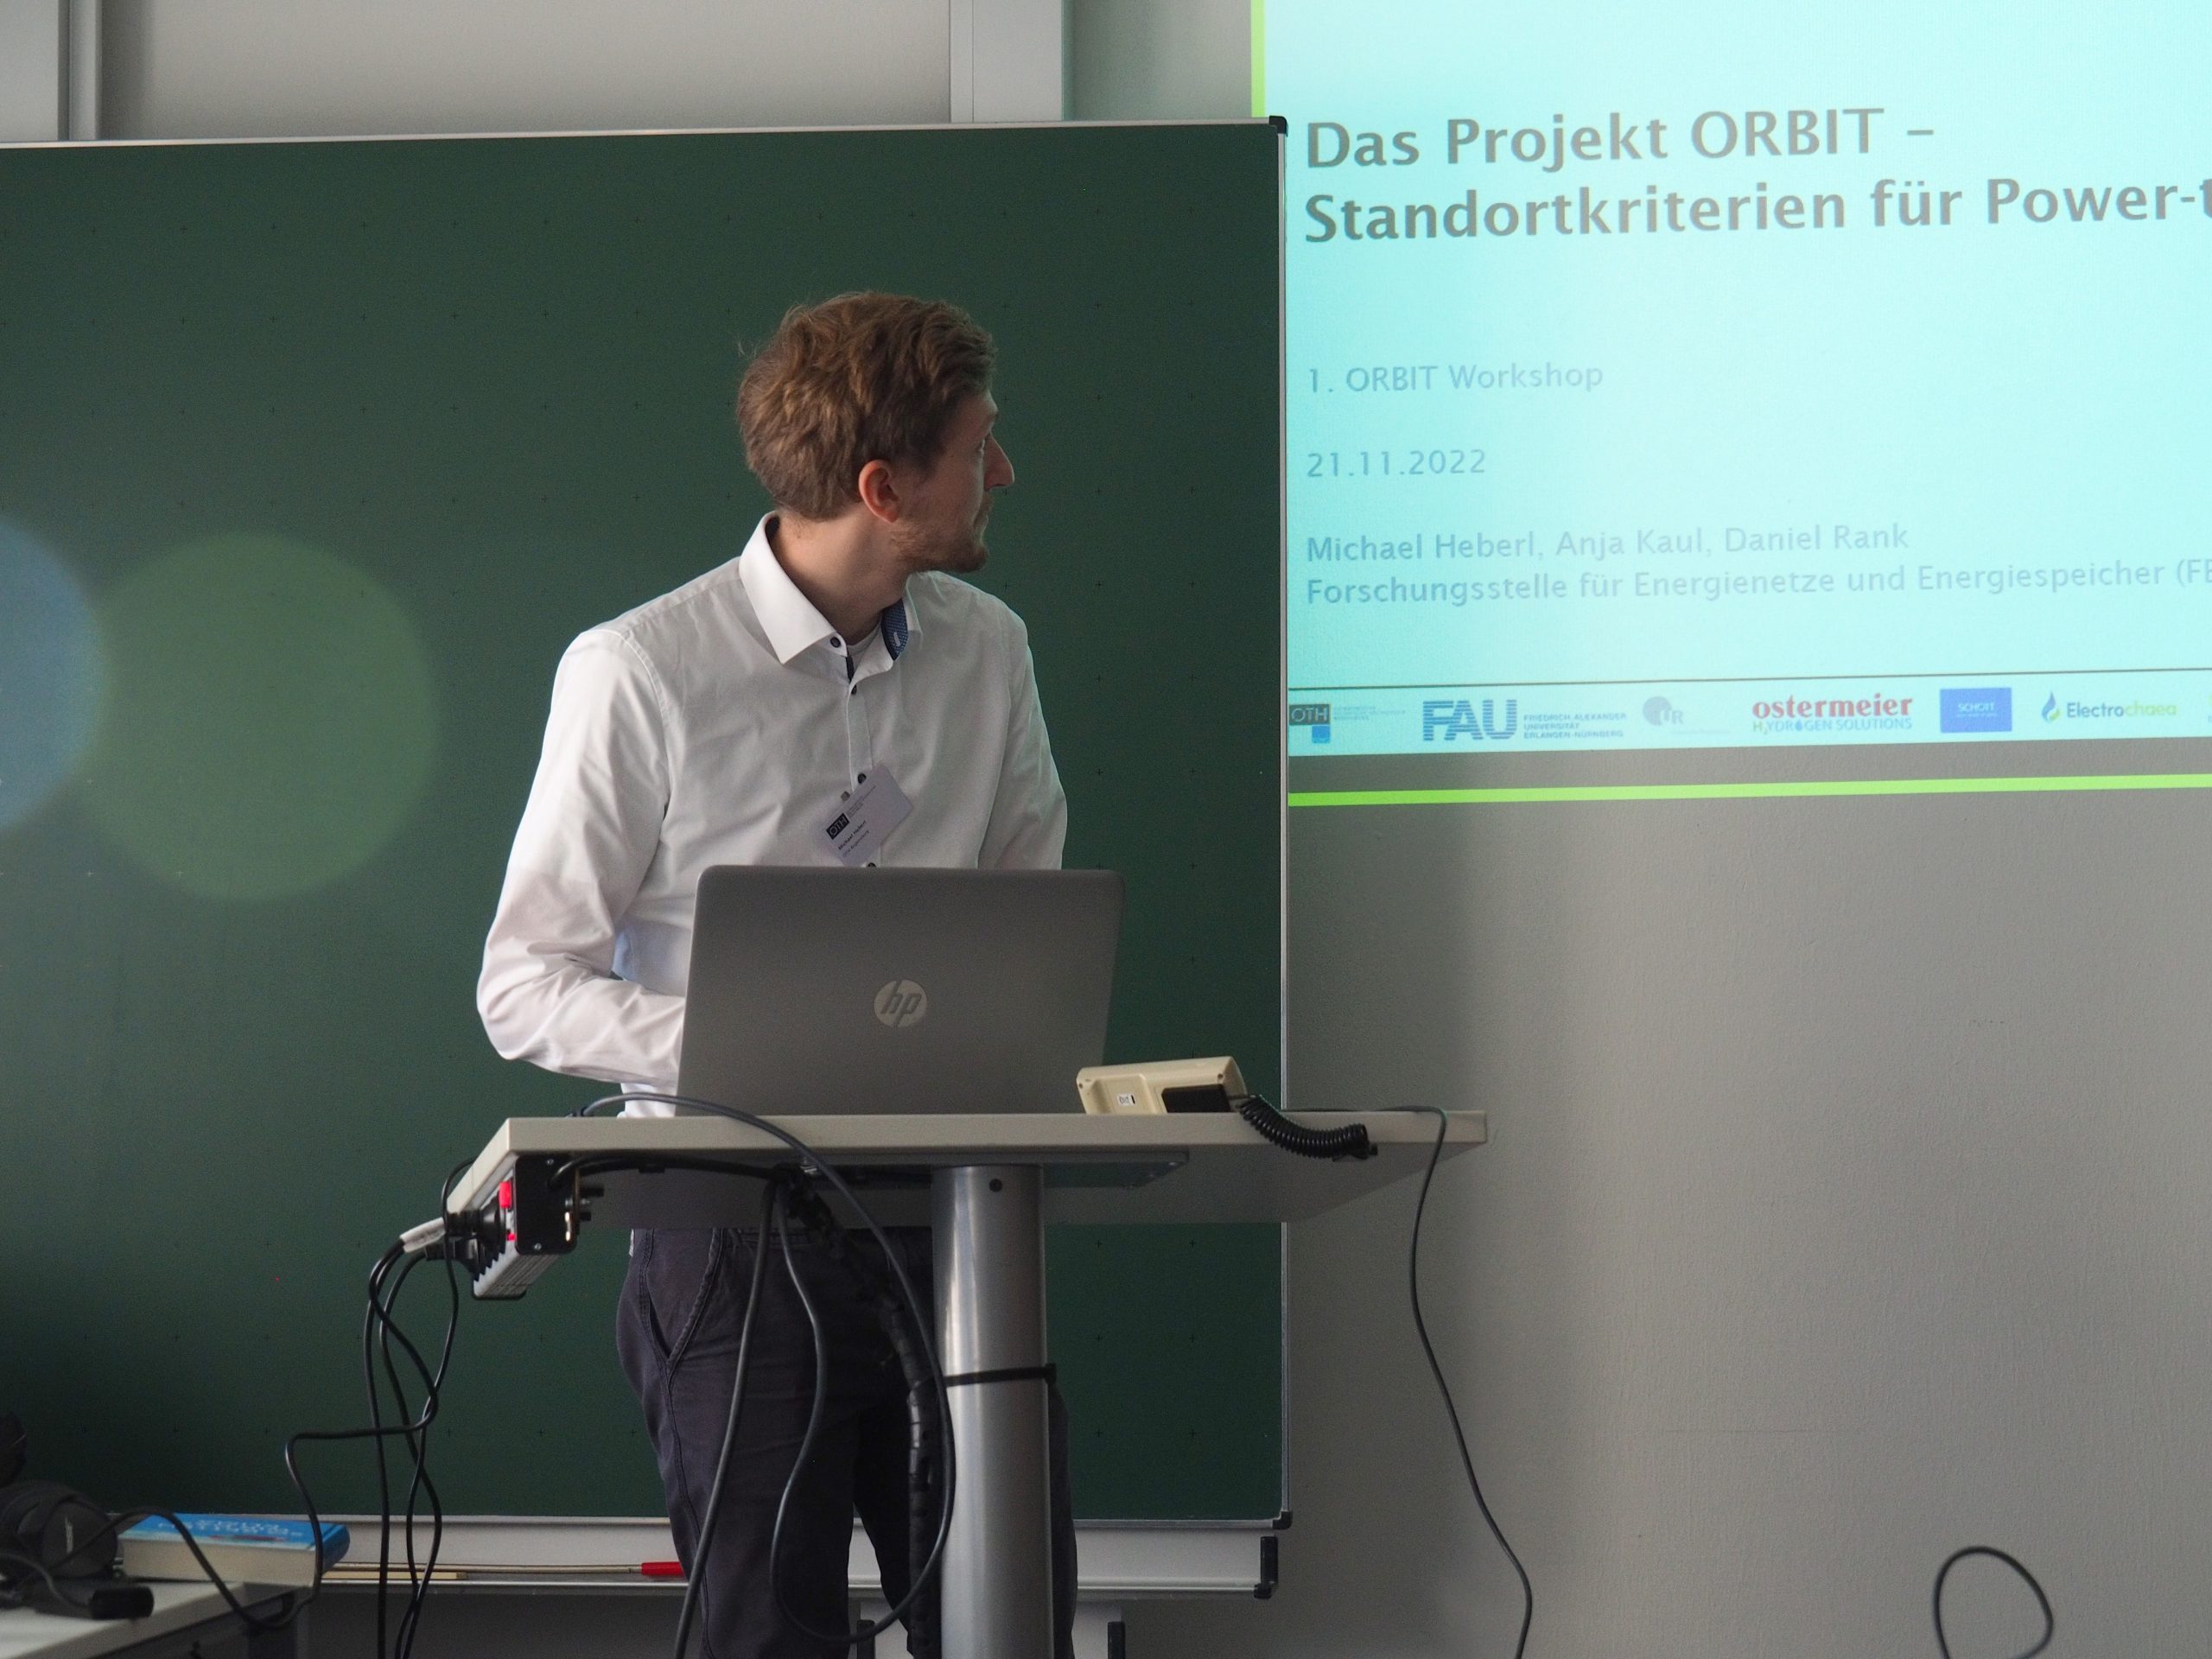 Michael Heberl from the ORBIT team presented the project and power-to-gas location criteria. Photo: Anja Kaul